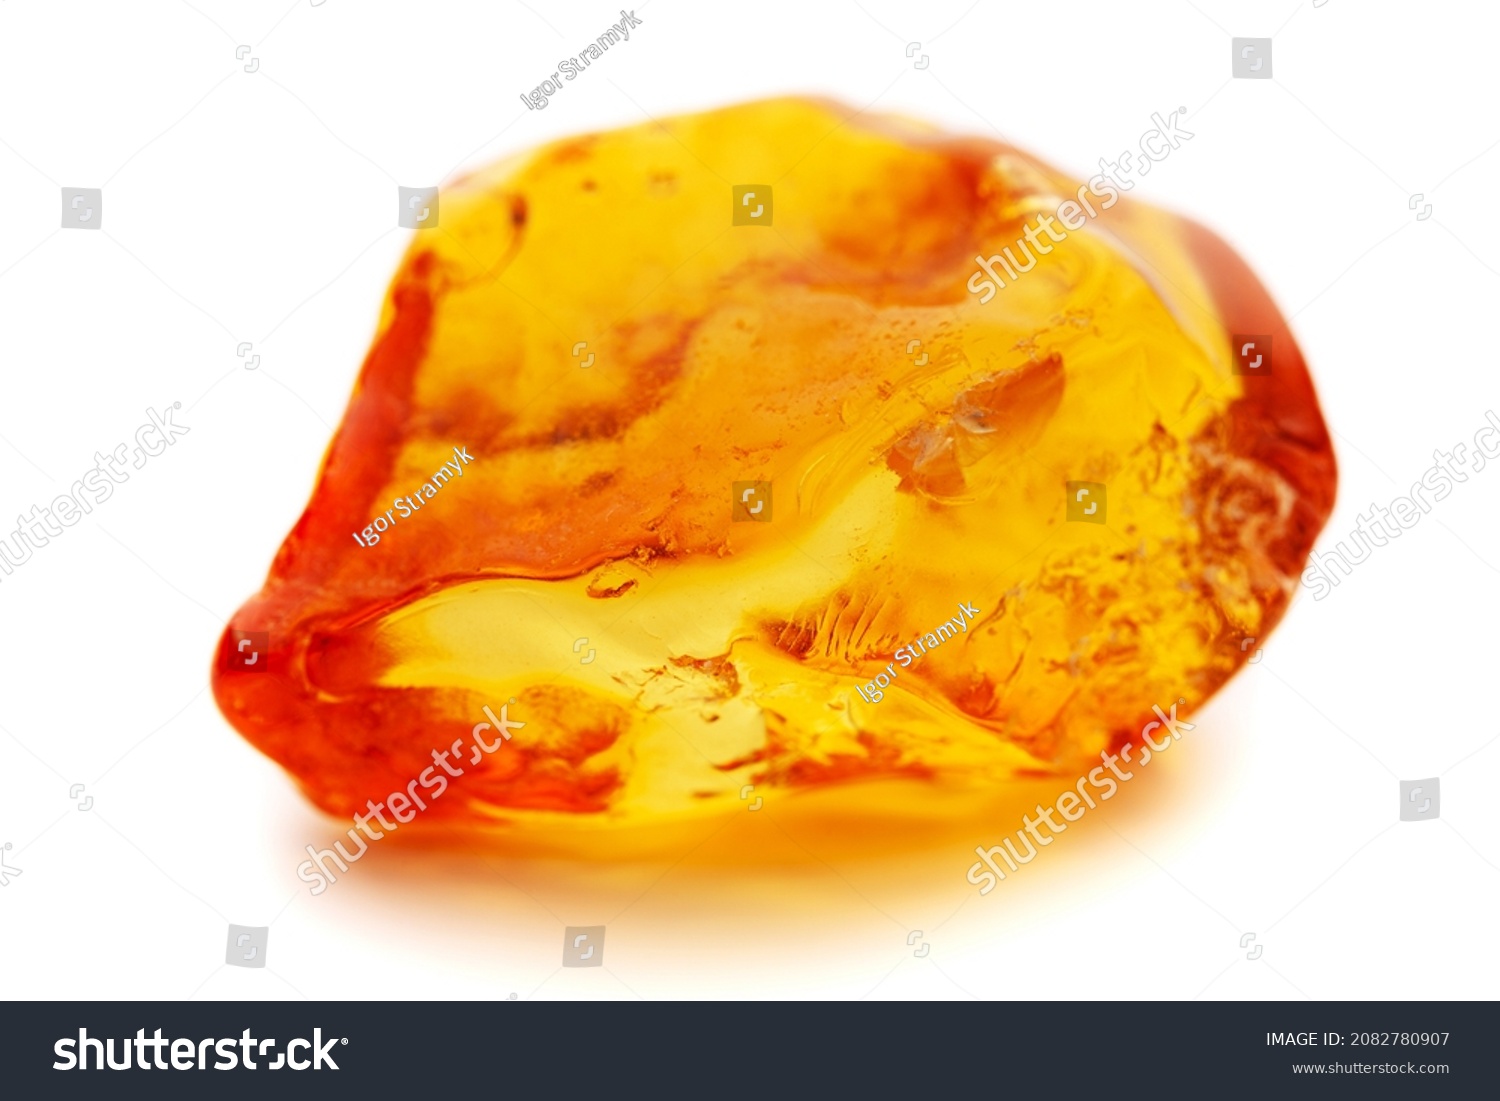 Natural amber. A piece of yellow opaque natural amber on white background. #2082780907